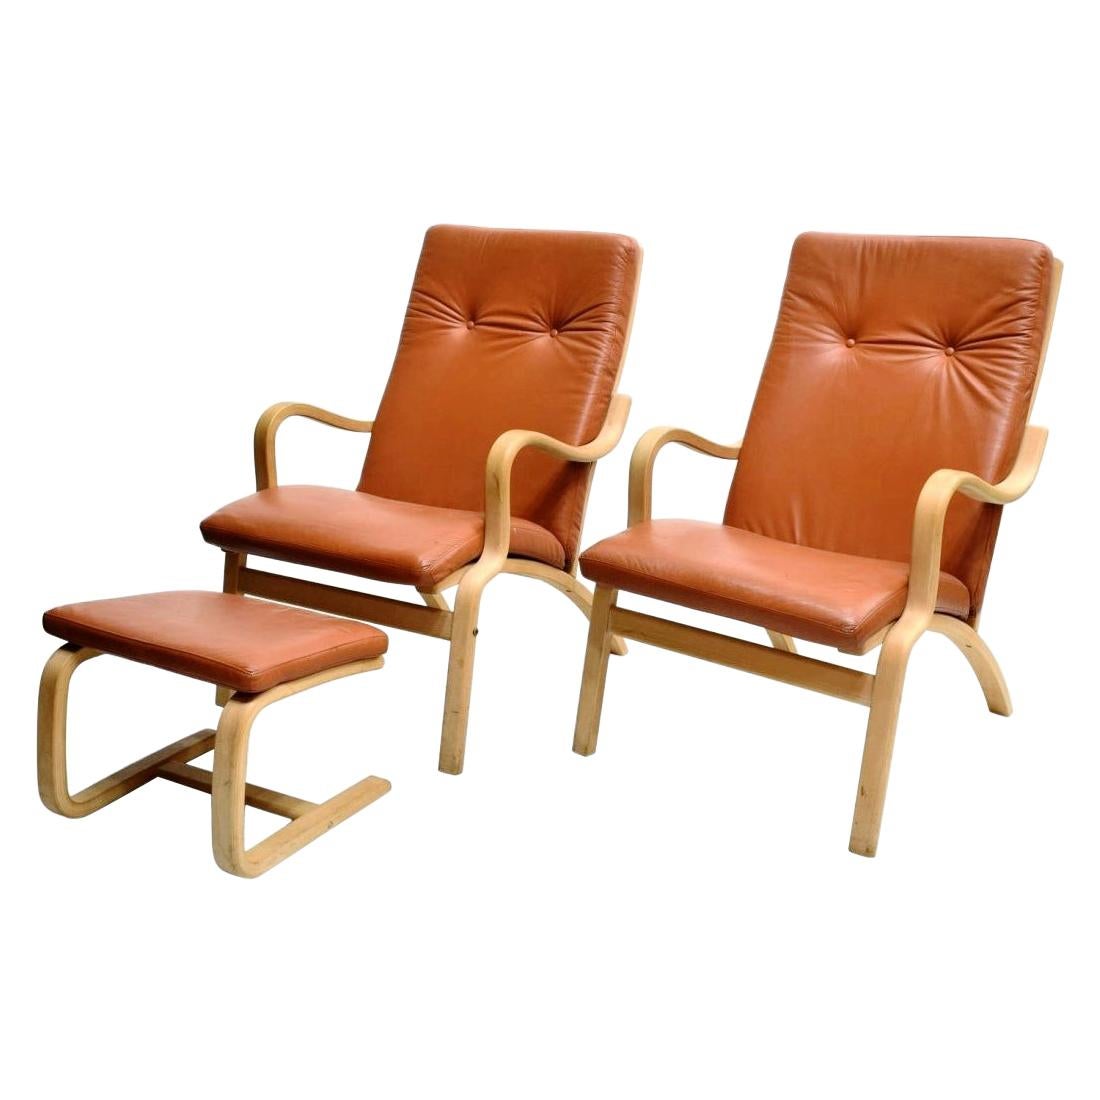 Scandinavian Bentwood Leather Lounge Chairs and Ottoman, circa 1970s